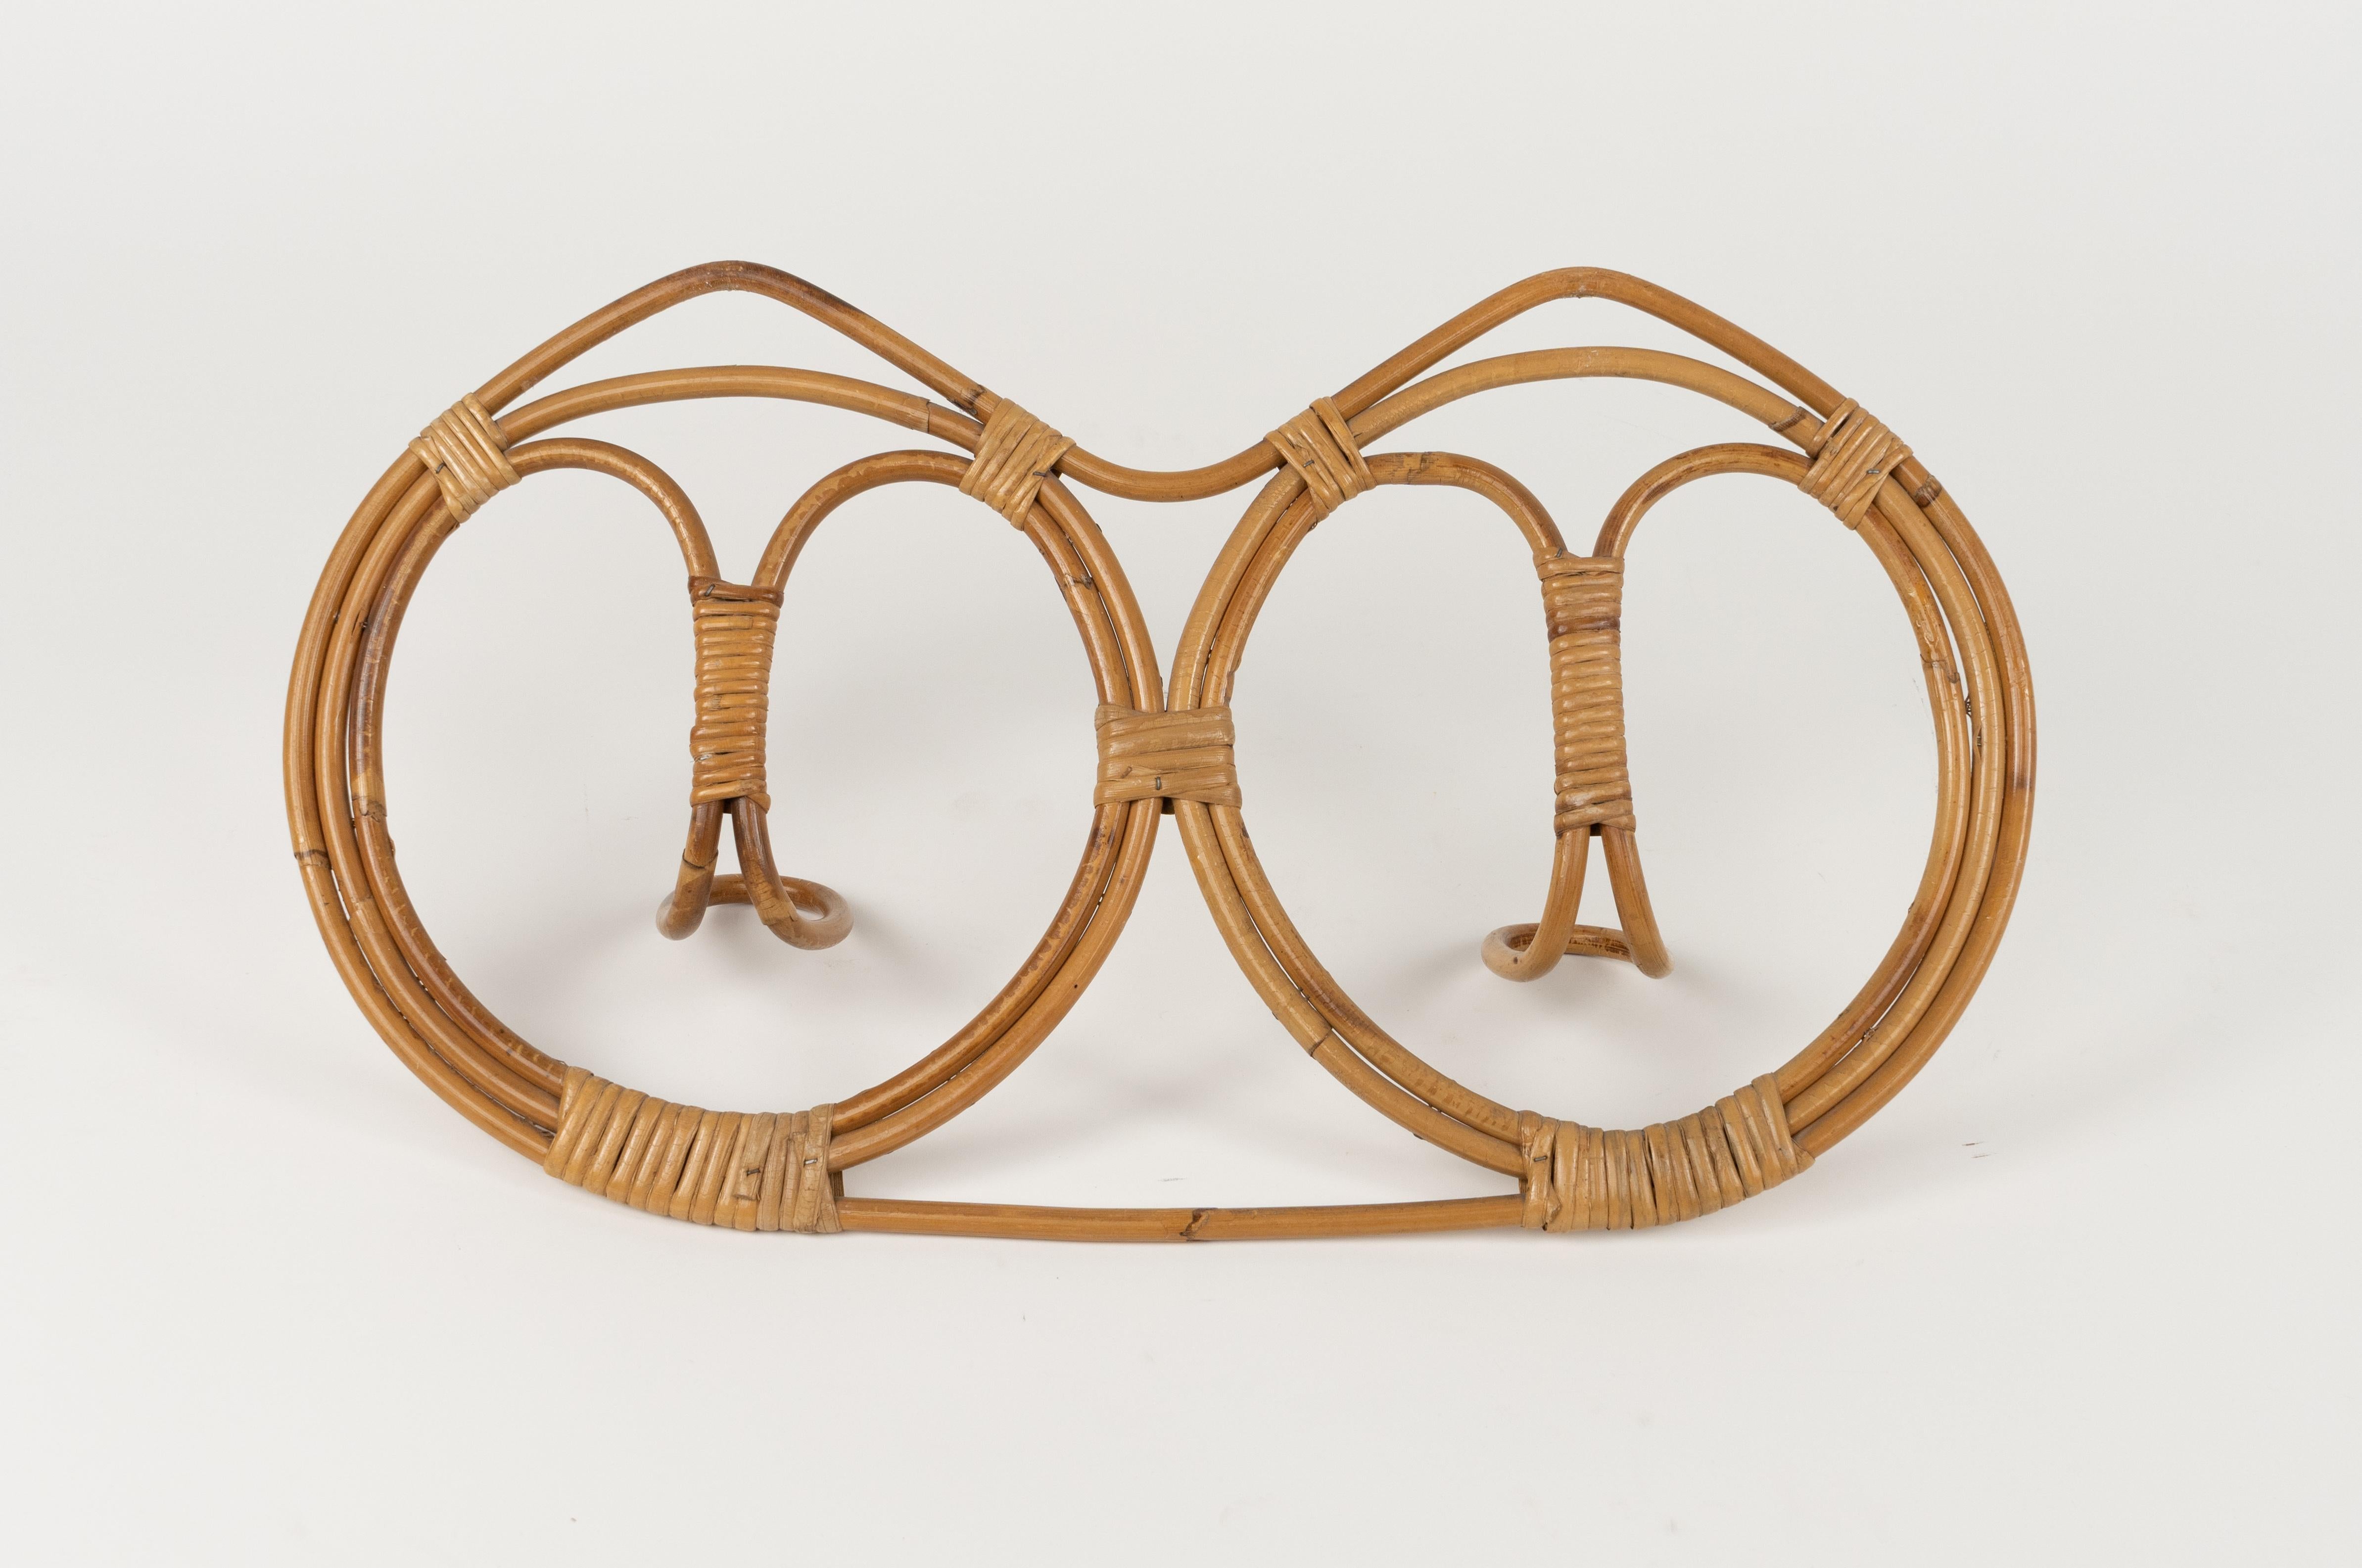 Midcentury Wall Coat Rack in Bamboo and Rattan by Franco Albini, Italy 1960s For Sale 13